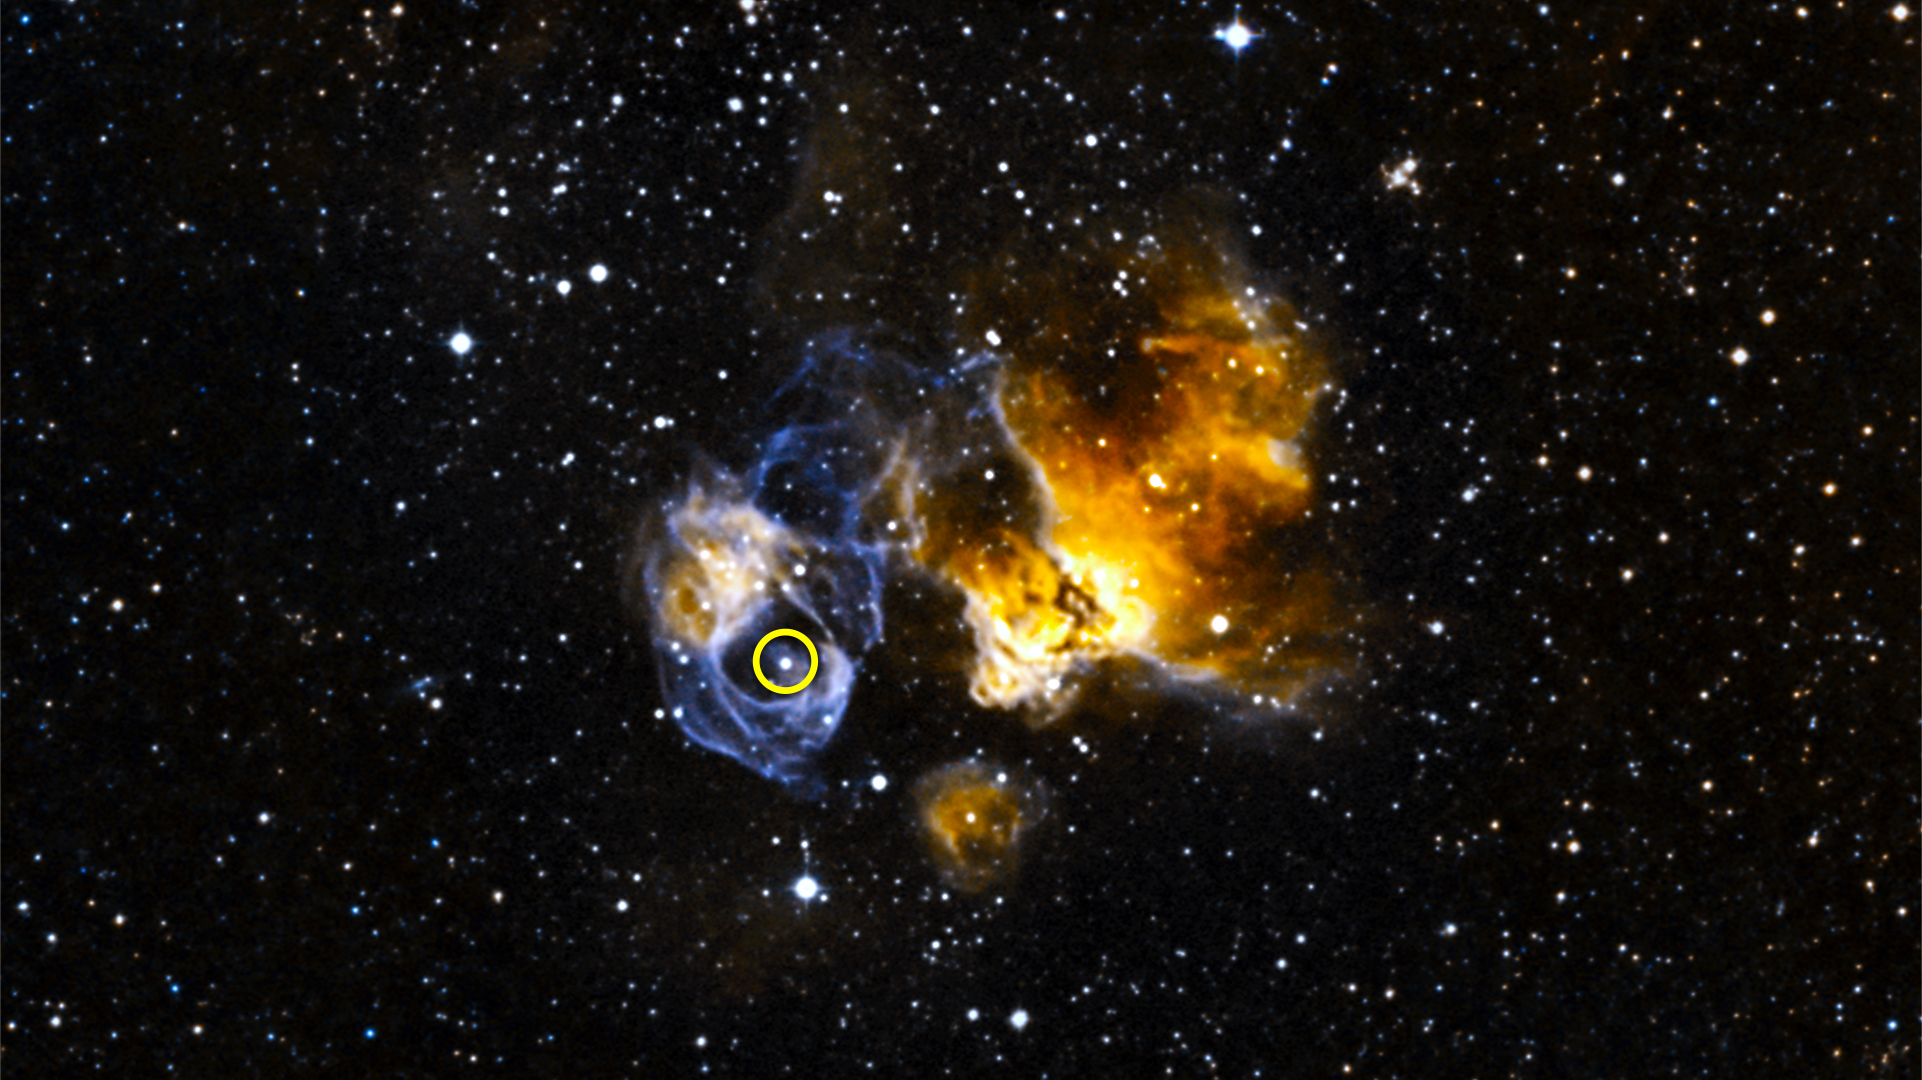 LMC P3 (circled) is located in a supernova remnant called DEM L241 in the Large Magellanic Cloud